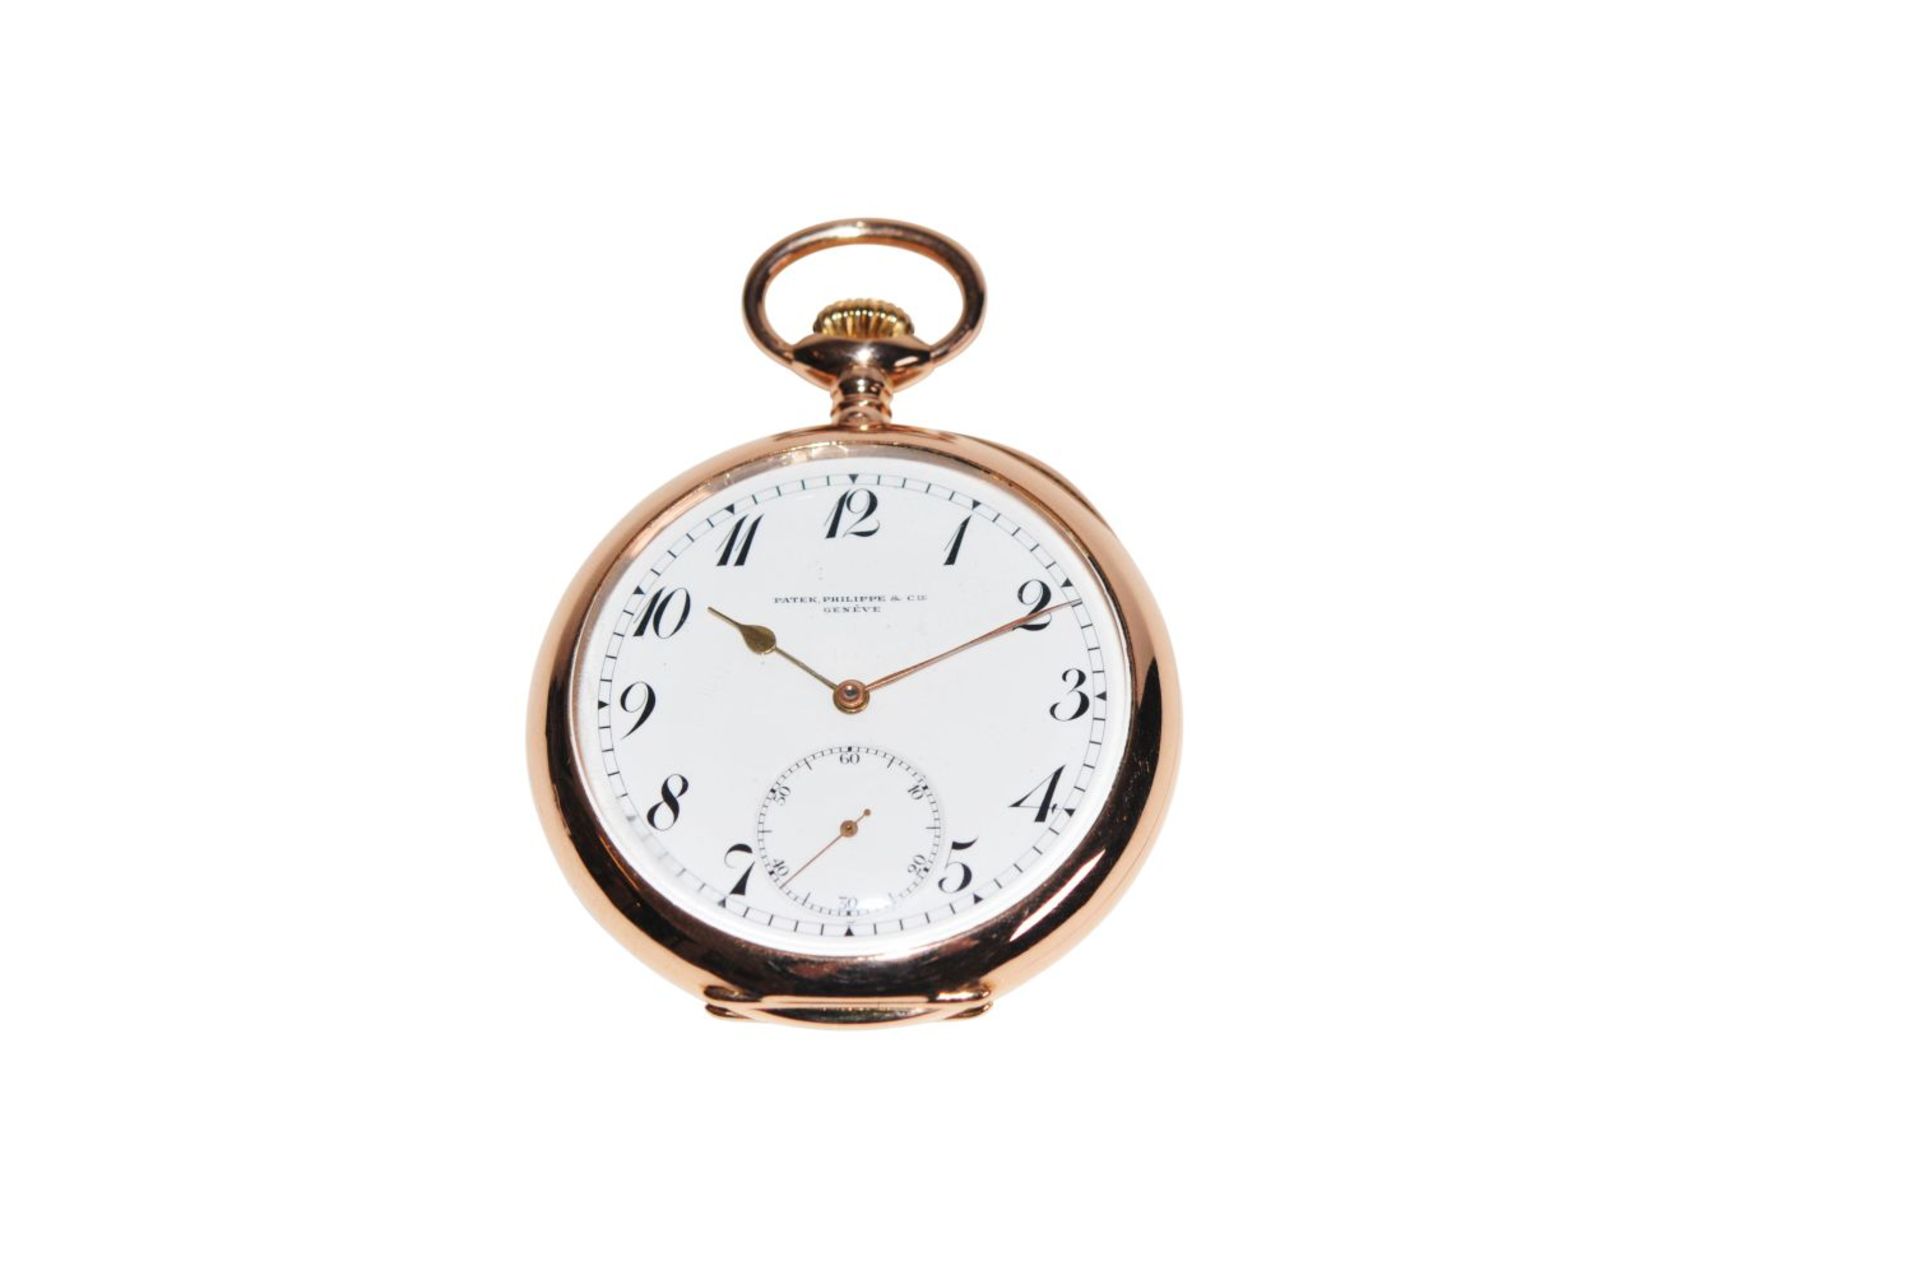 Patek Philippe LepineLepine pocket watch in 14K gold with 2nd cover signed Patek Philippe with